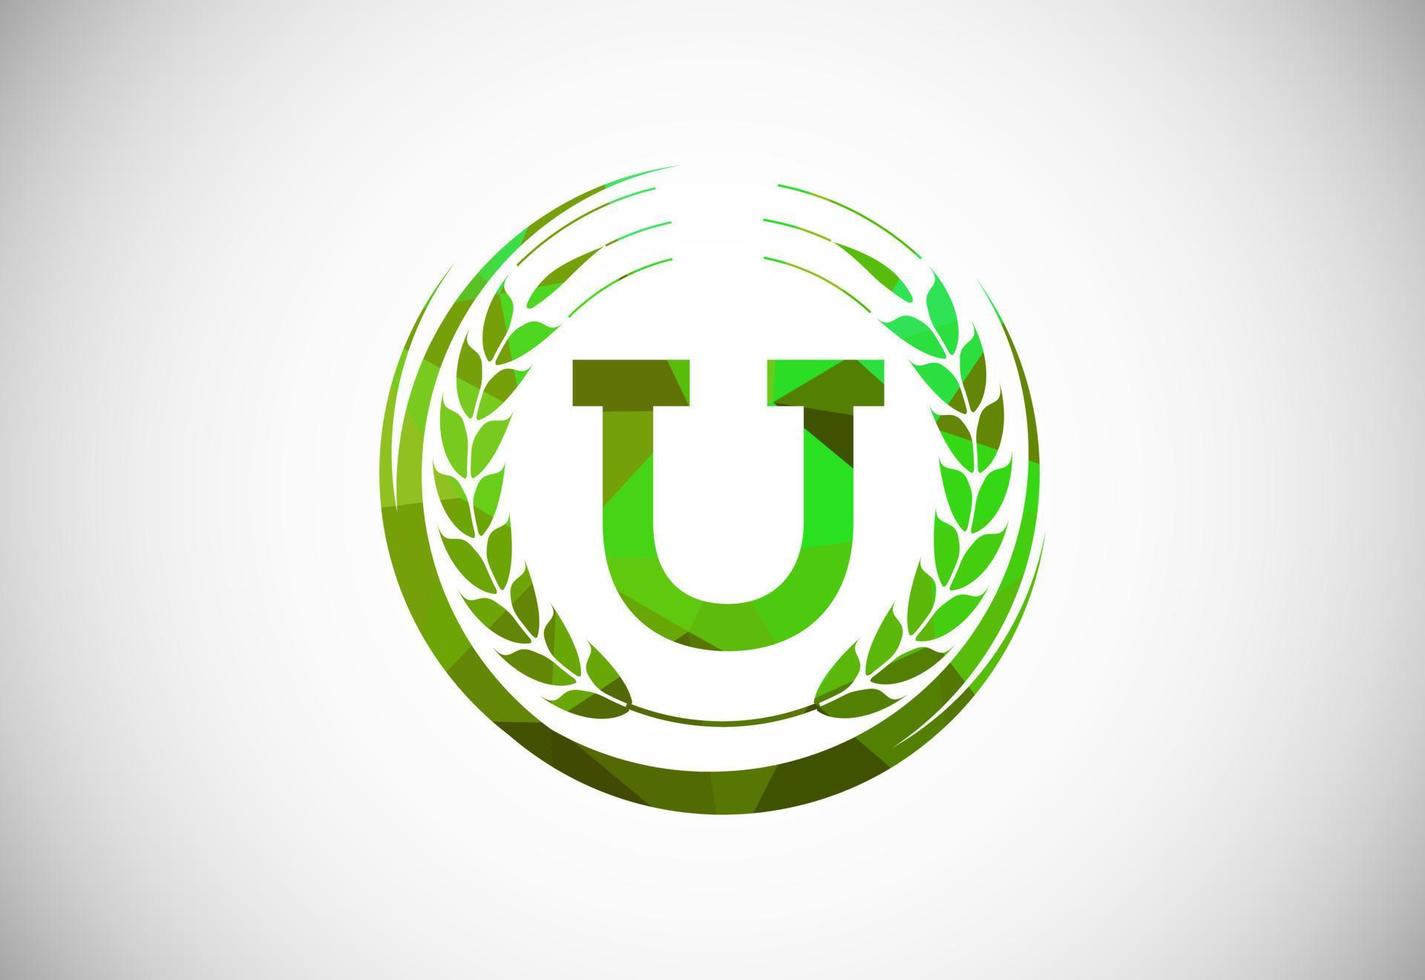 Alphabet U sign with a wheat wreath. Polygonal low poly organic wheat farming logo concept. Agriculture logo design vector template.